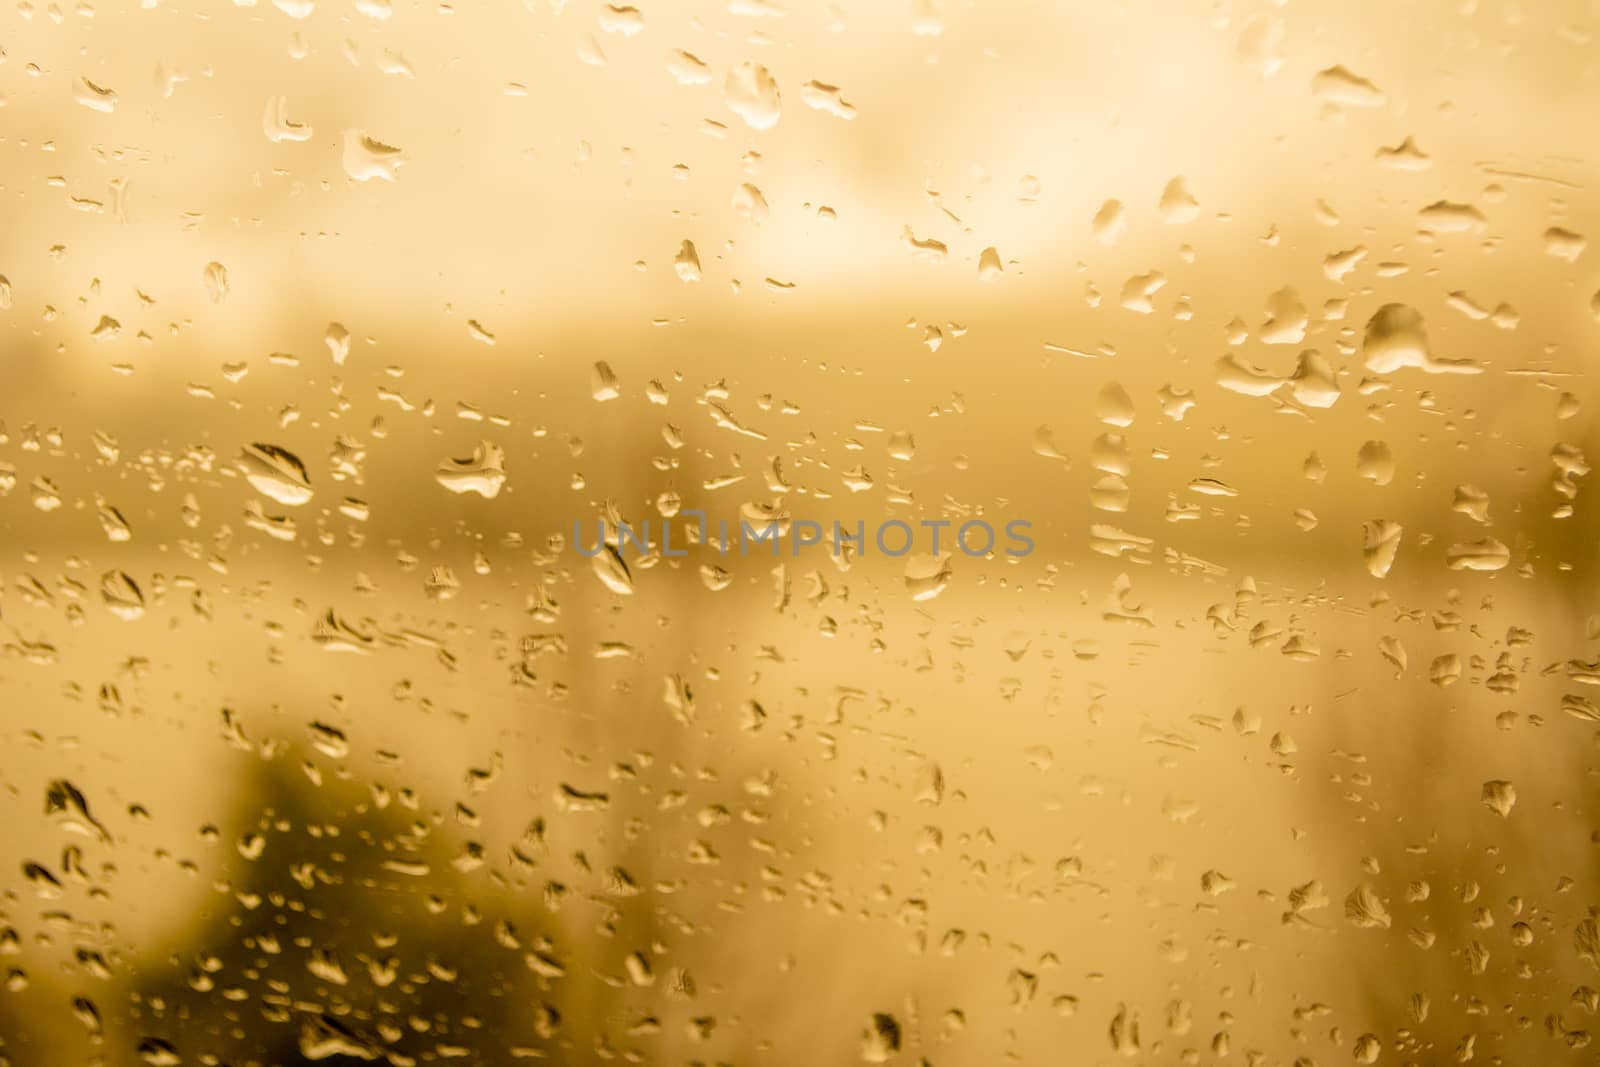 Raindrops on a window, illustrating gray and rainy weather during the day. Yellow Orange background by kb79